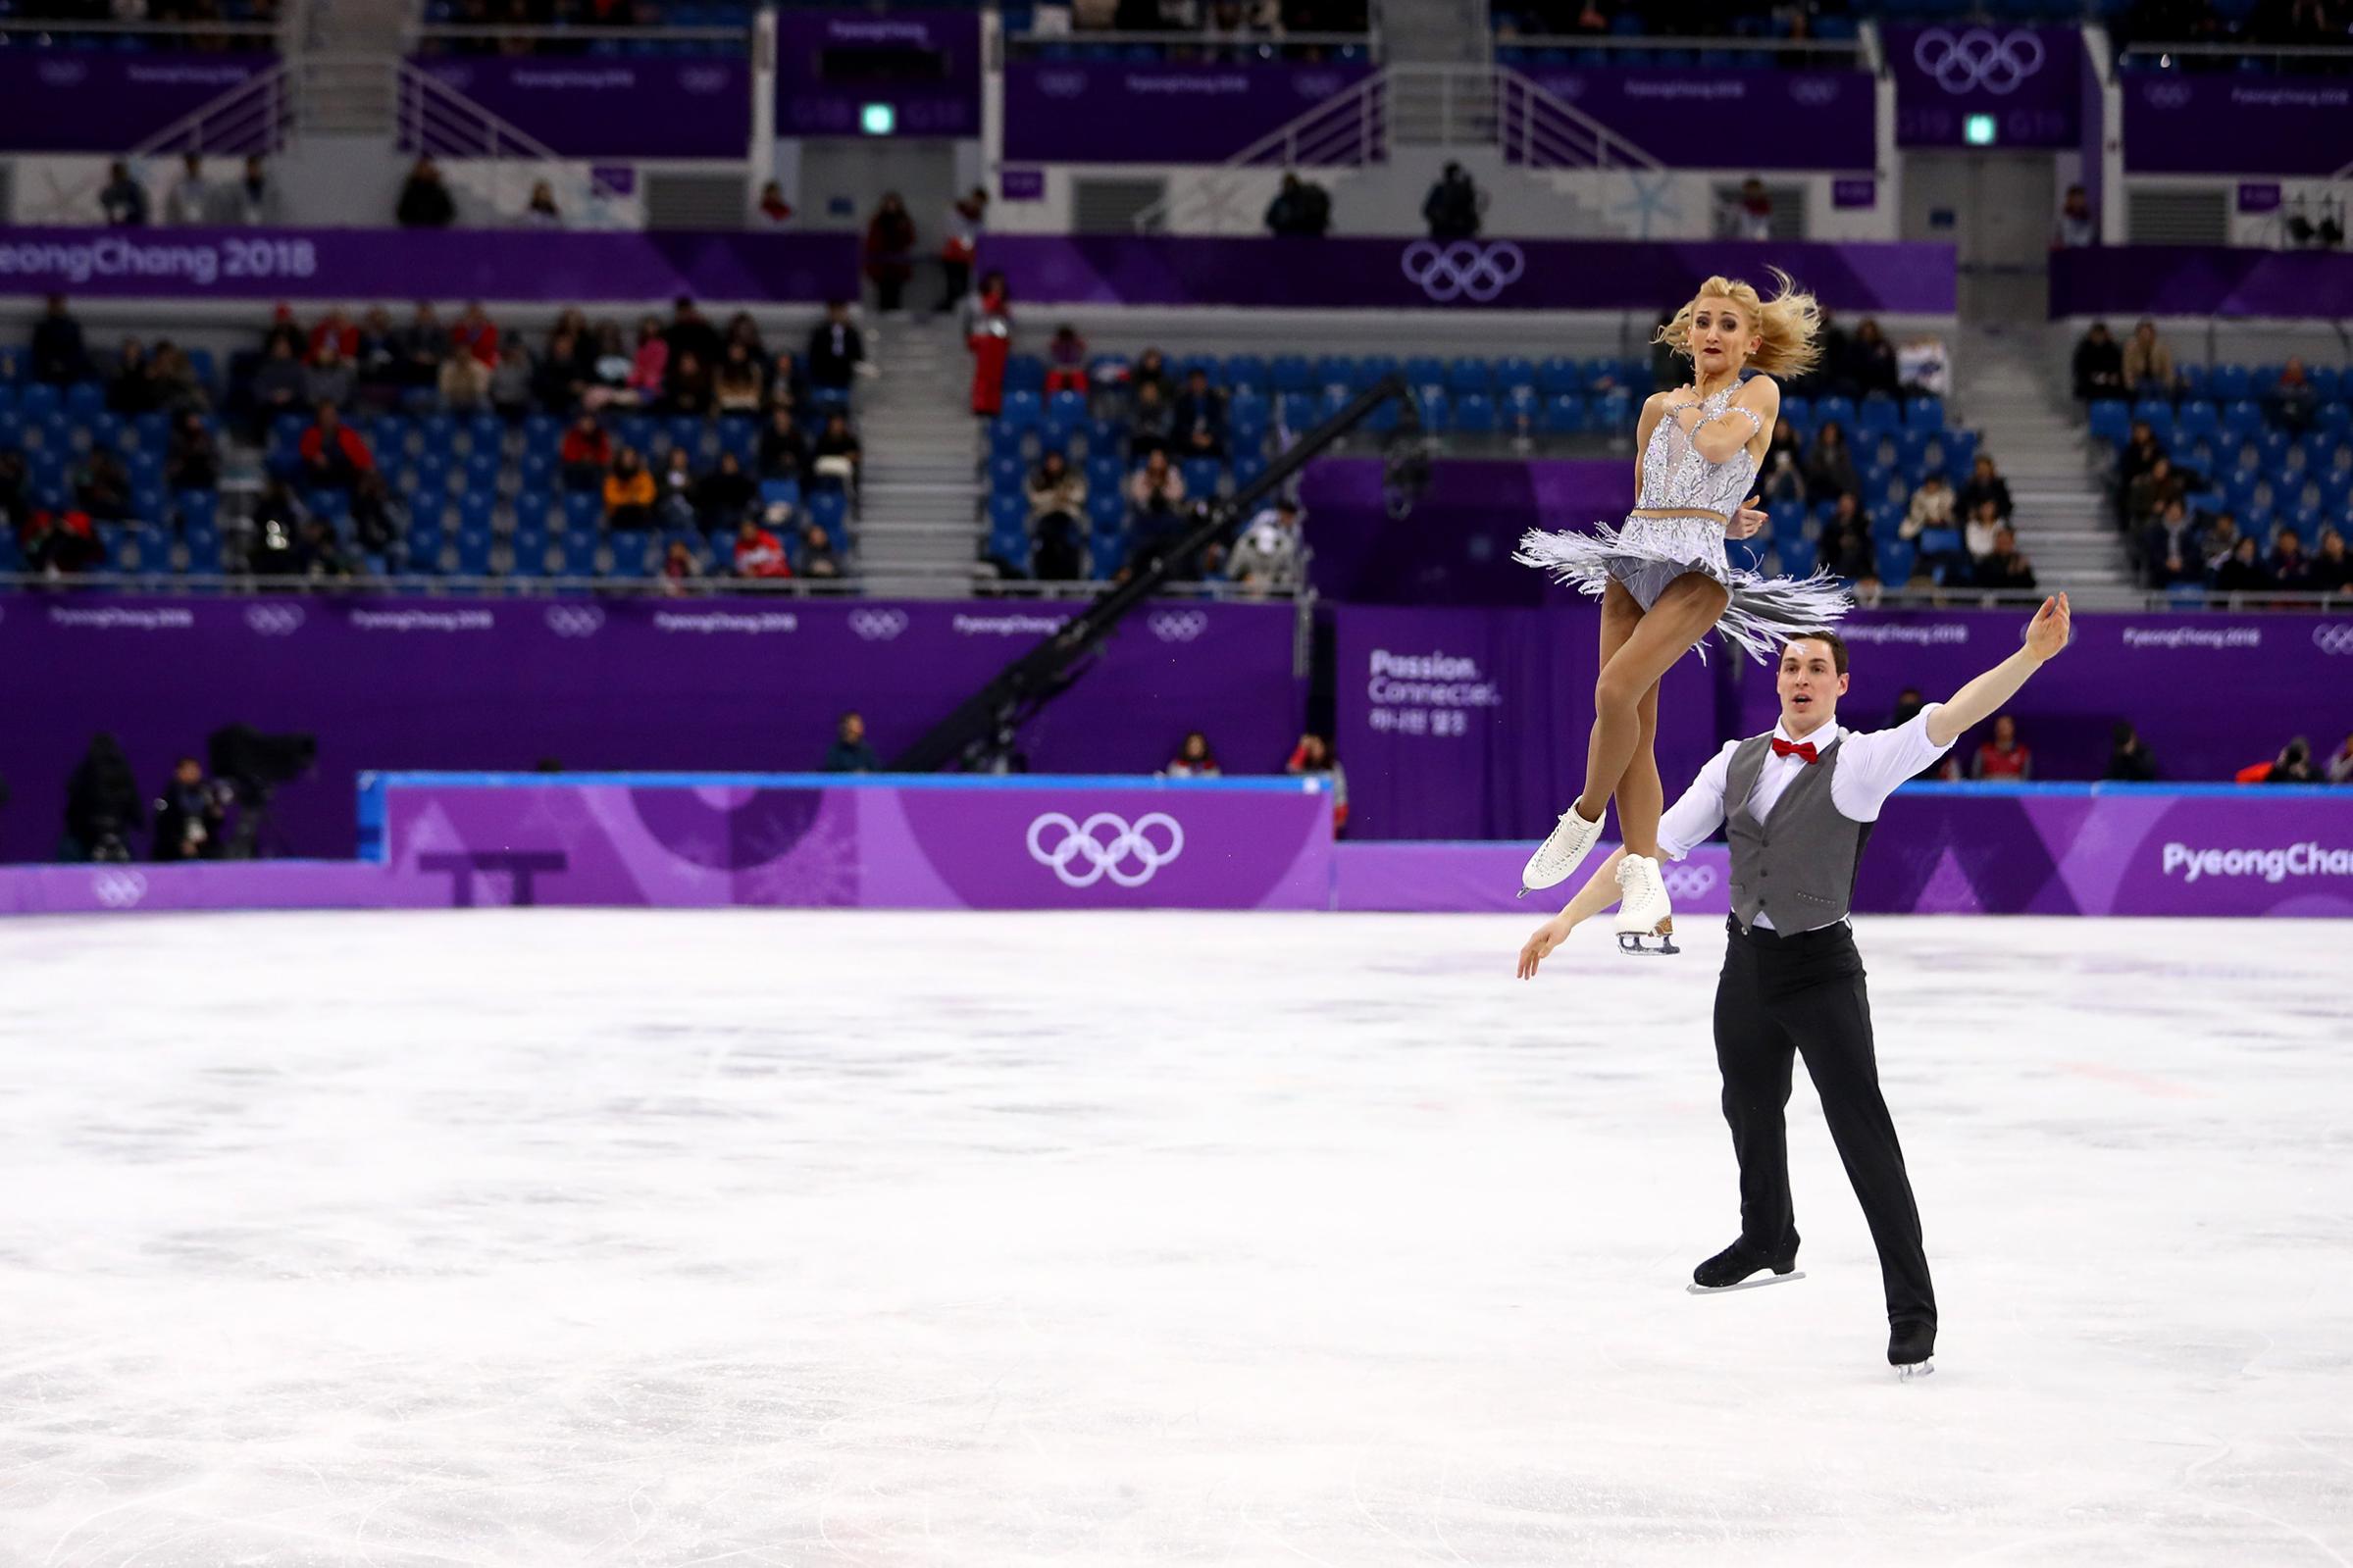 Aljona Savchenko and Bruno Massot of Germany compete during the Pair Skating Short Program on day five of the PyeongChang 2018 Winter Olympics at Gangneung Ice Arena on Feb. 14, 2018.